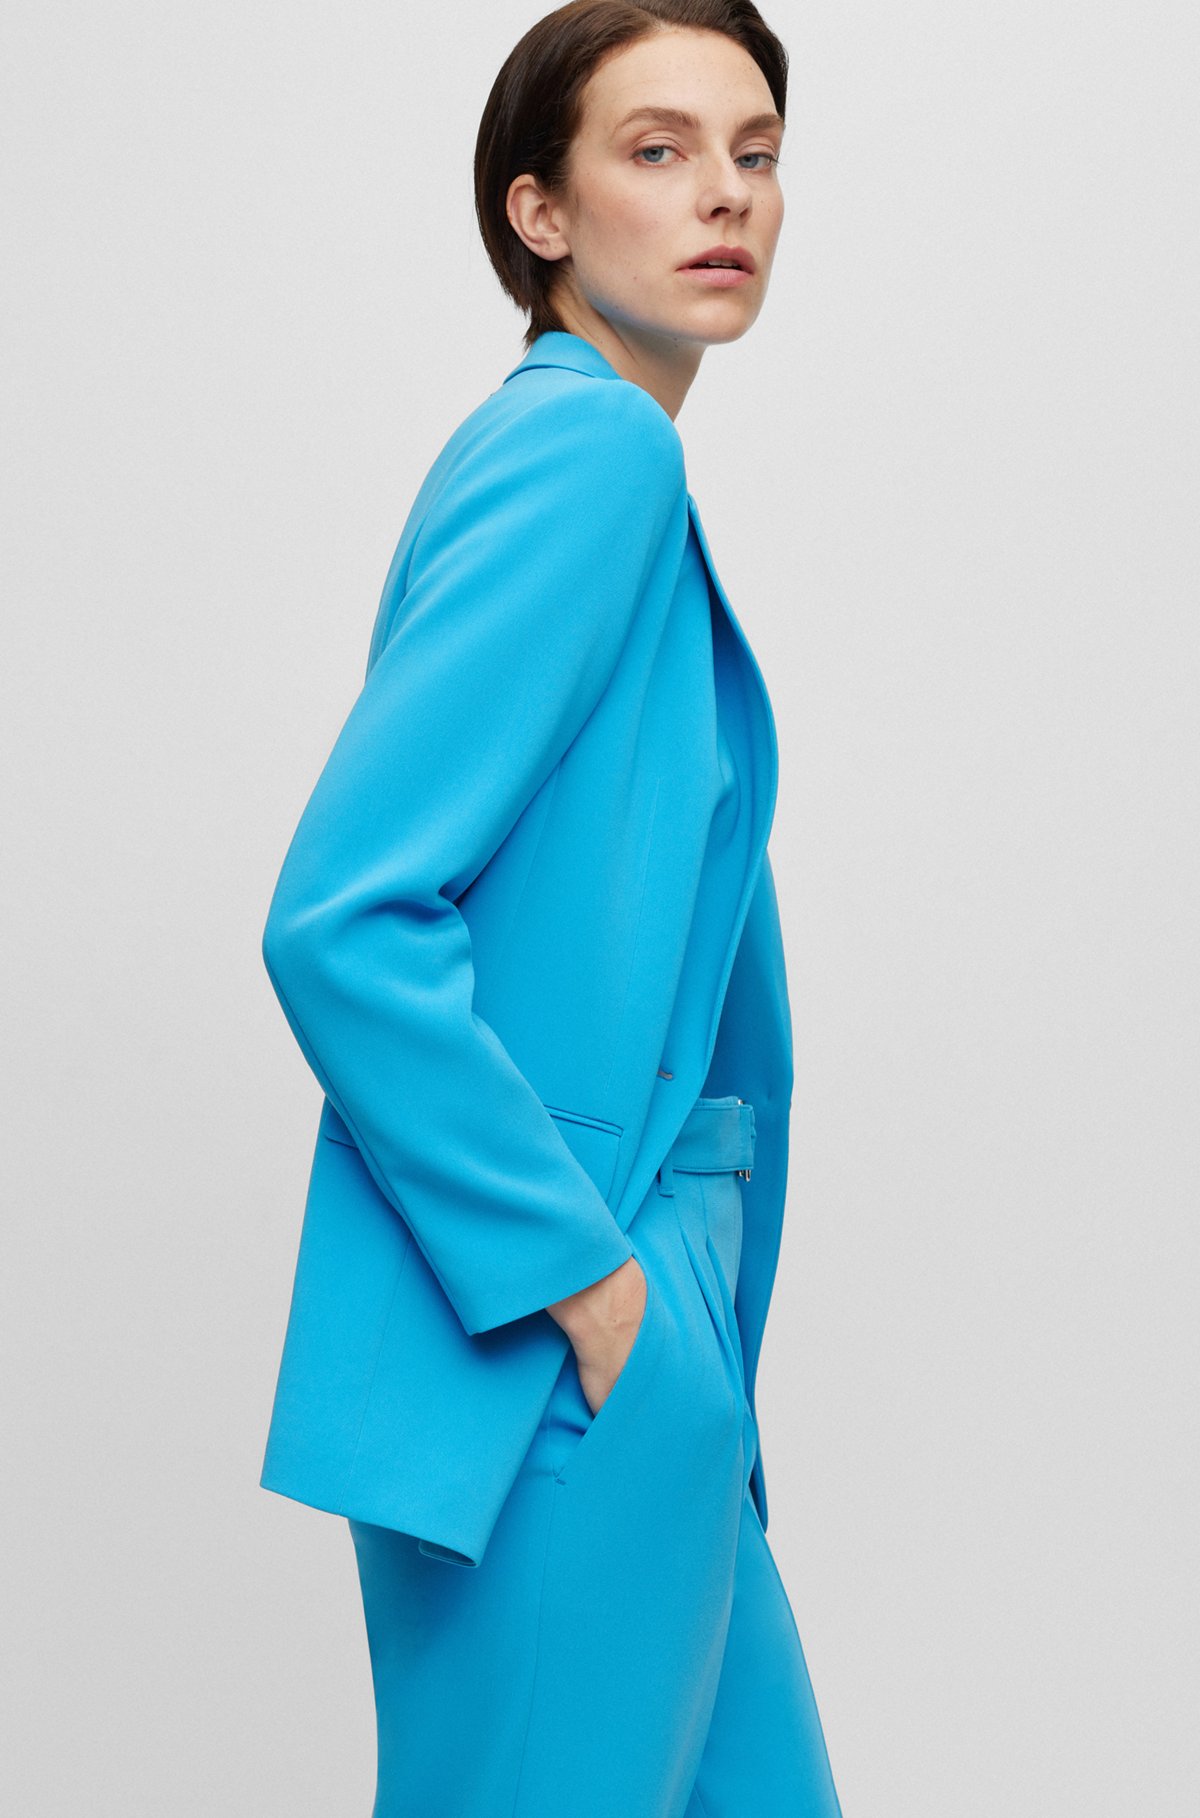 Regular-fit jacket in crease-resistant crepe, Turquoise